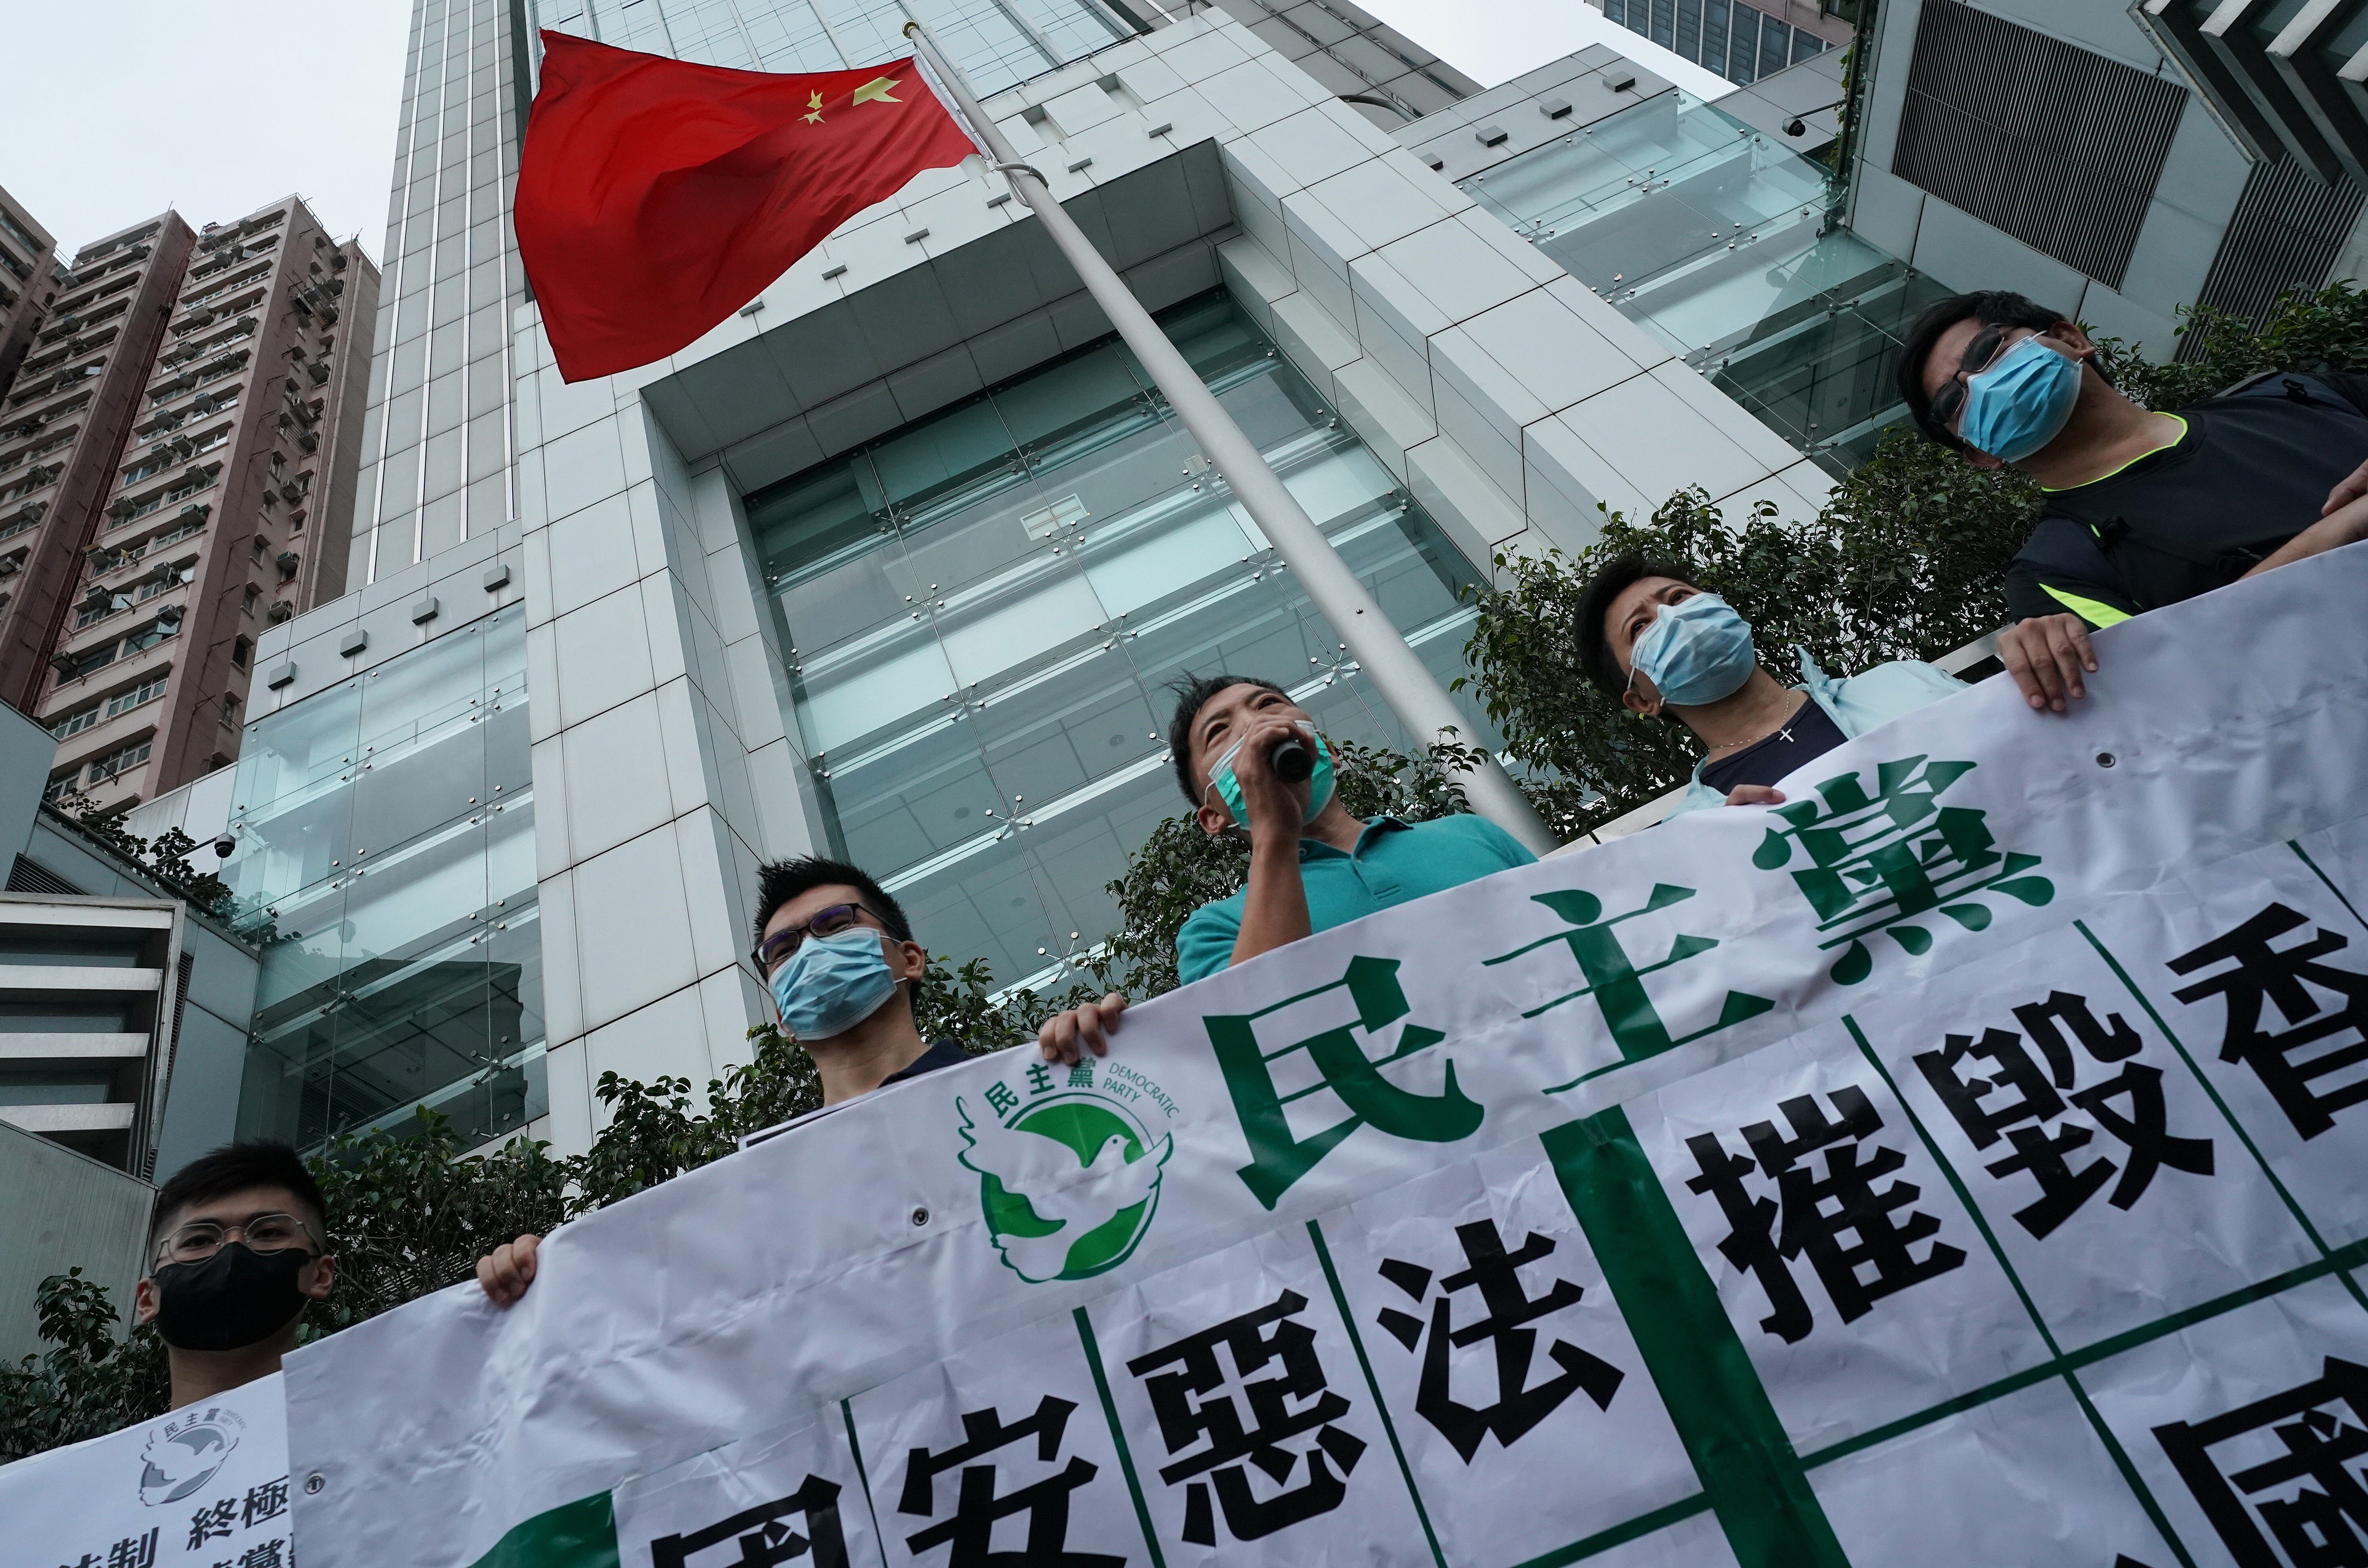 Pan-democrat lawmakers protest against a new national security law for Hong Kong, outside the central government’s liaison office in Sai Ying Pun on May 22. The law was unanimously passed by the National People’s Congress Standing Committee on June 30. Photo: Felix Wong